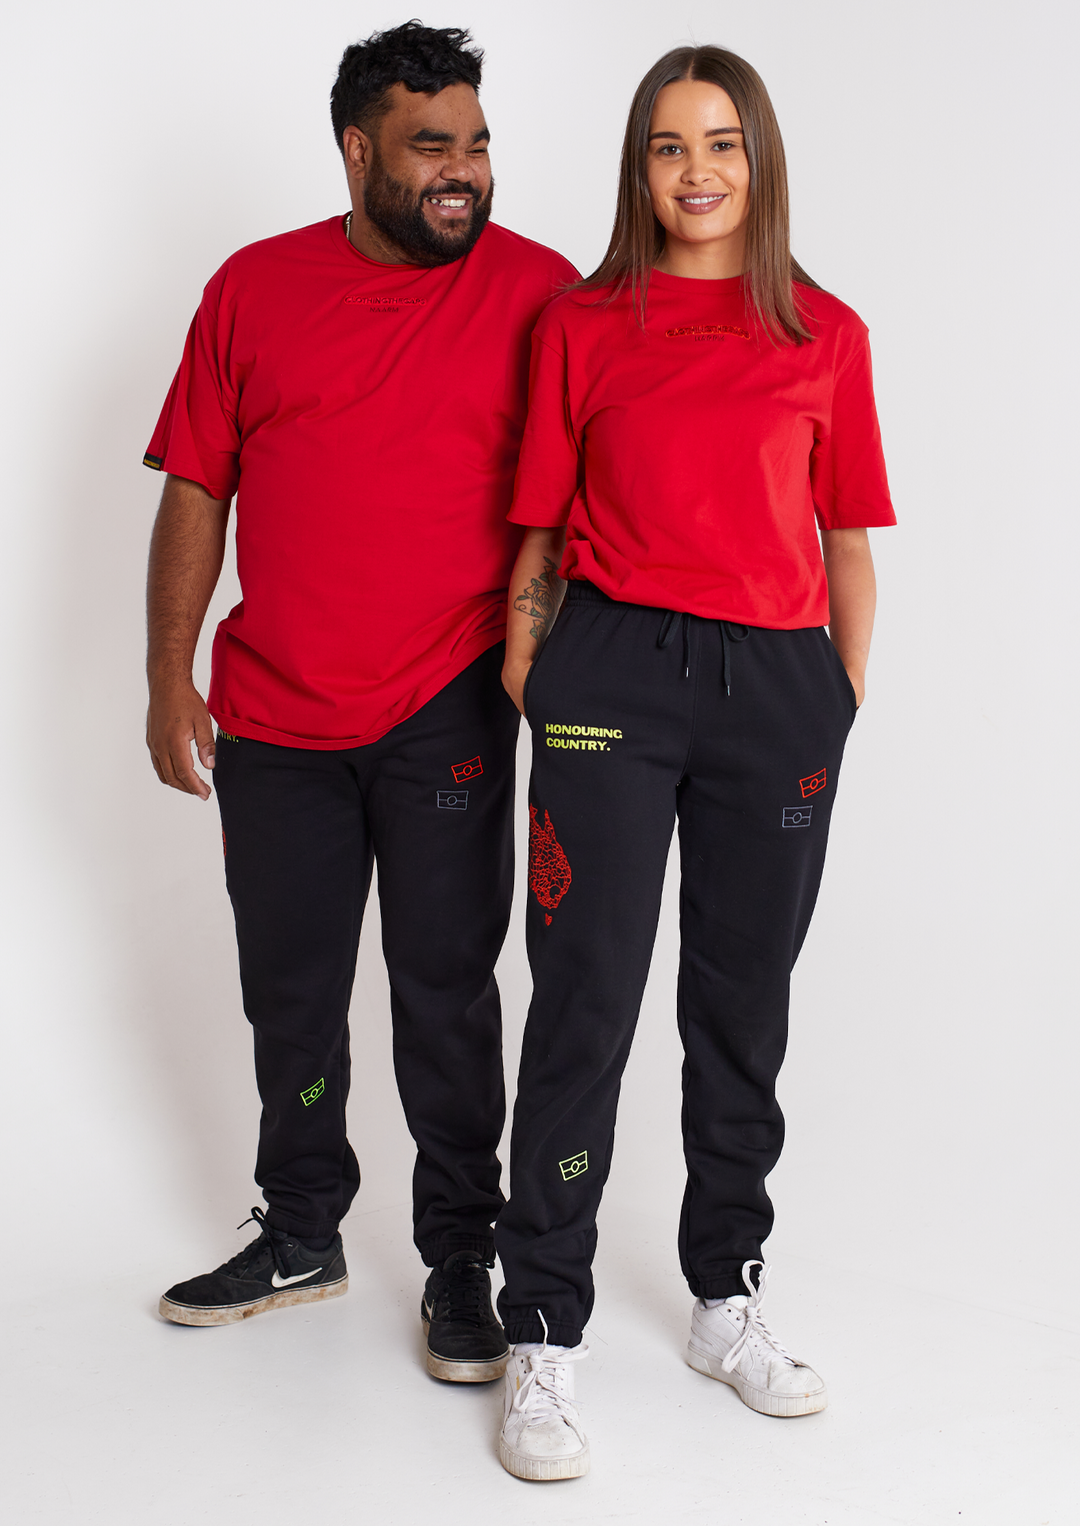 Clothing The Gaps. Honouring country track pants. Black warm track pants. With embroidered decolonised map of 'Australia' in red on side of right knee and above the embroidered phrase 'Honour Country' in bright yellow on middle of right thigh. Embroidered flags bright yellow at bottom of right leg and a red and grey flag on pocket of left leg. Features deep side pockets, elastic waist with black draw strings.